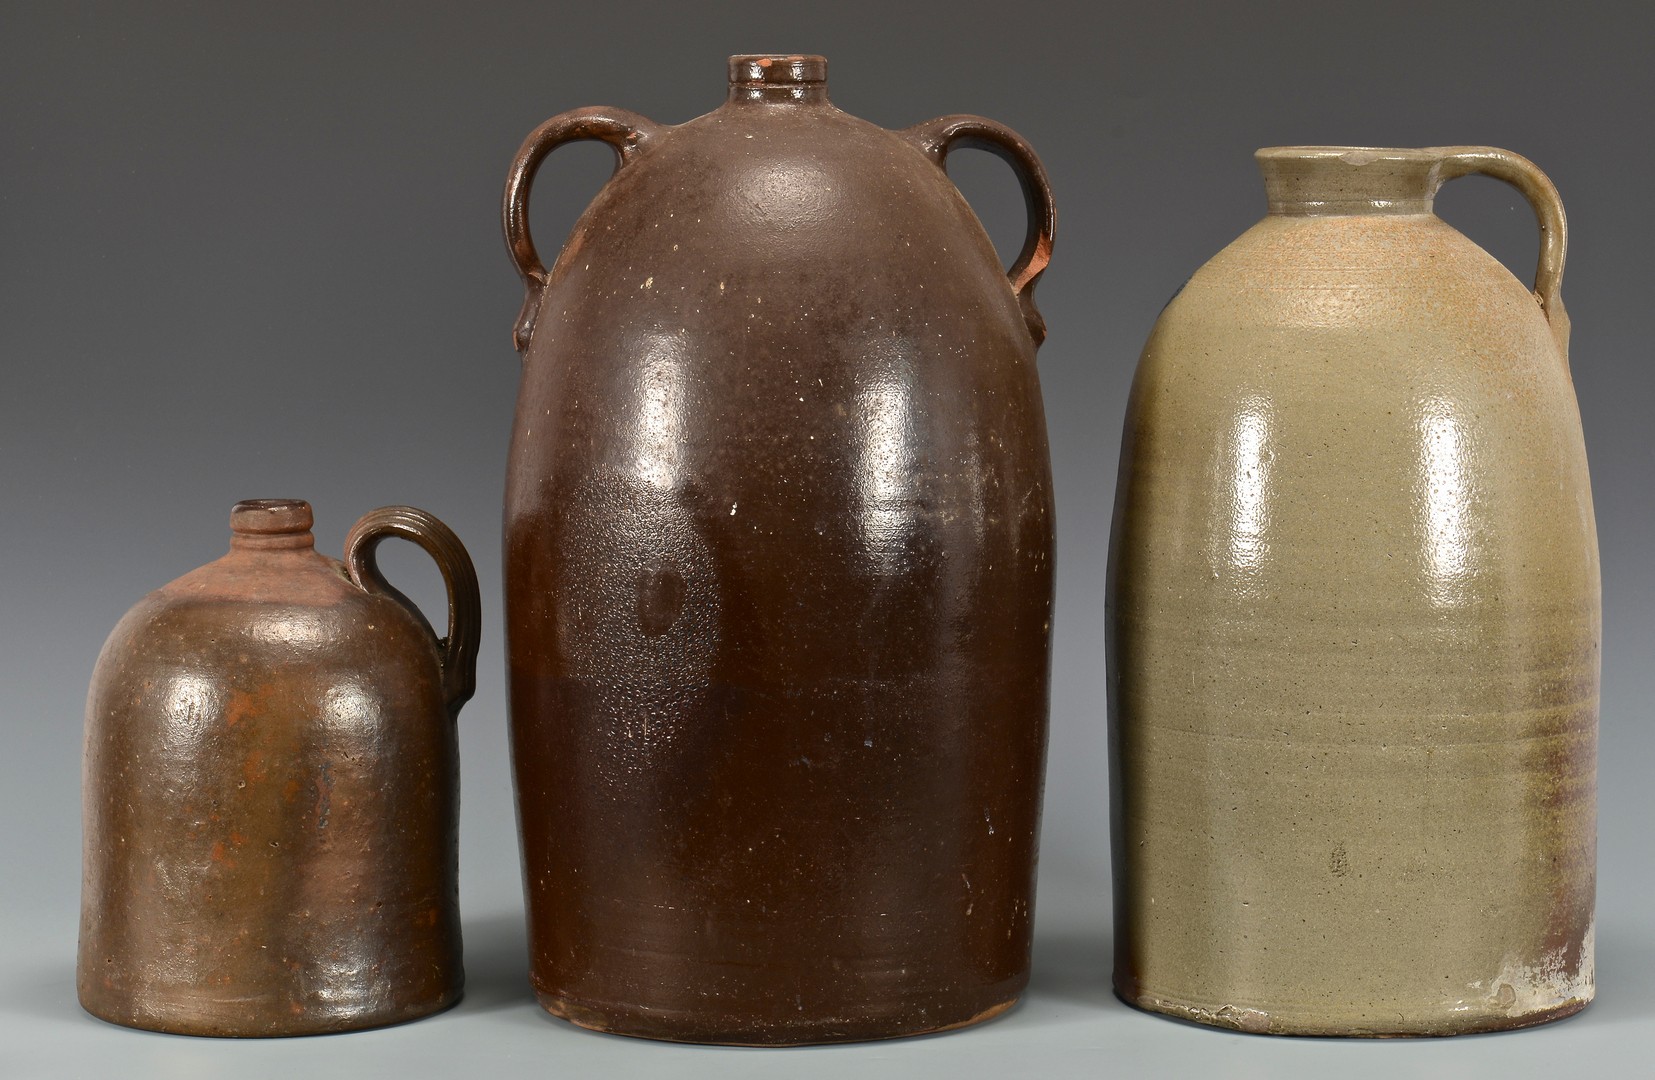 Lot 654: Grouping of 3 East TN pottery jugs